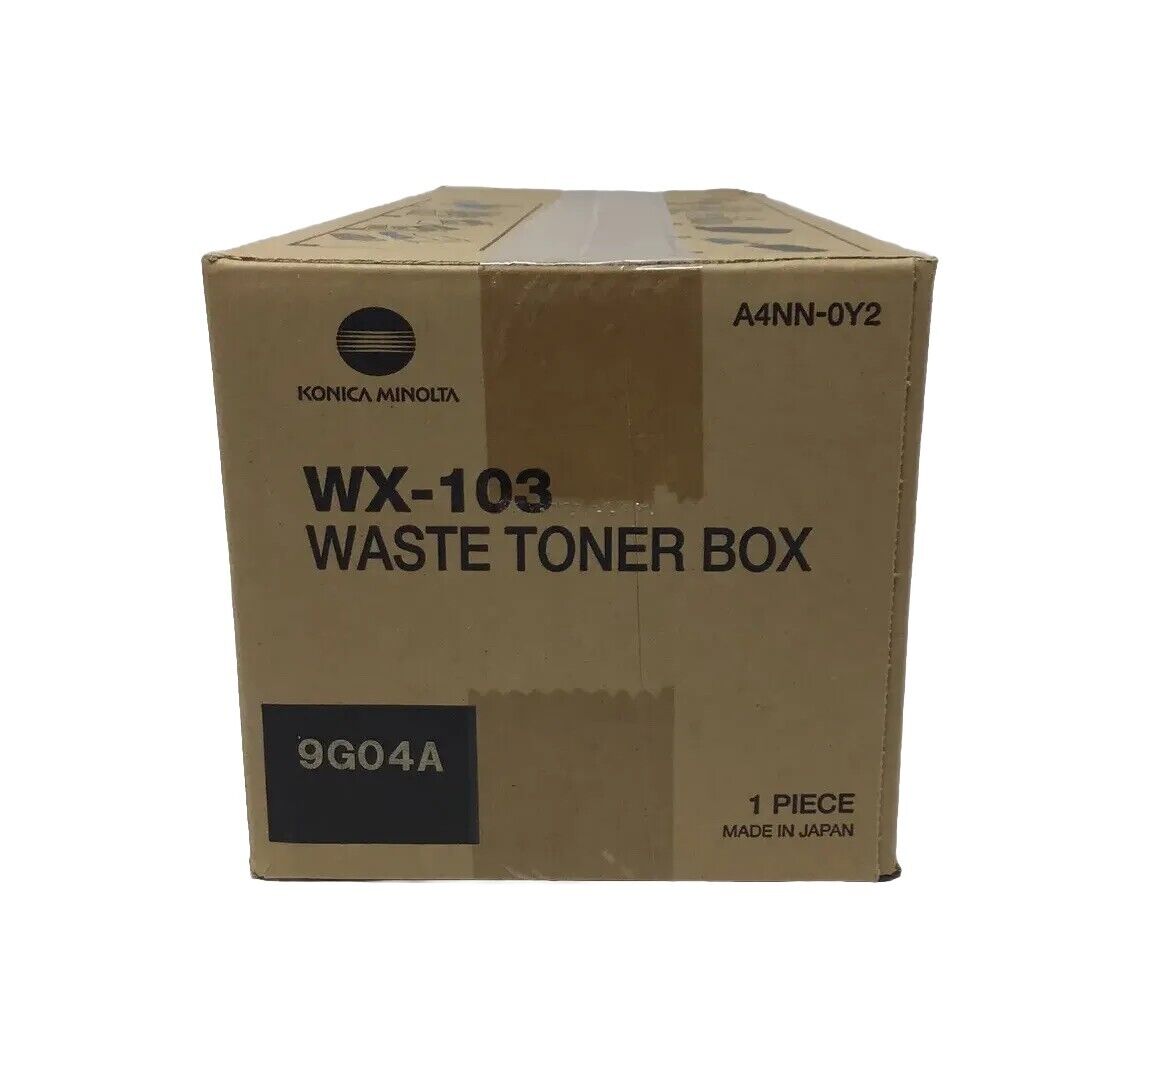 New Konica Minolta WX-103 Waste Box Waste Toner Container A4NNOY2 Sealed